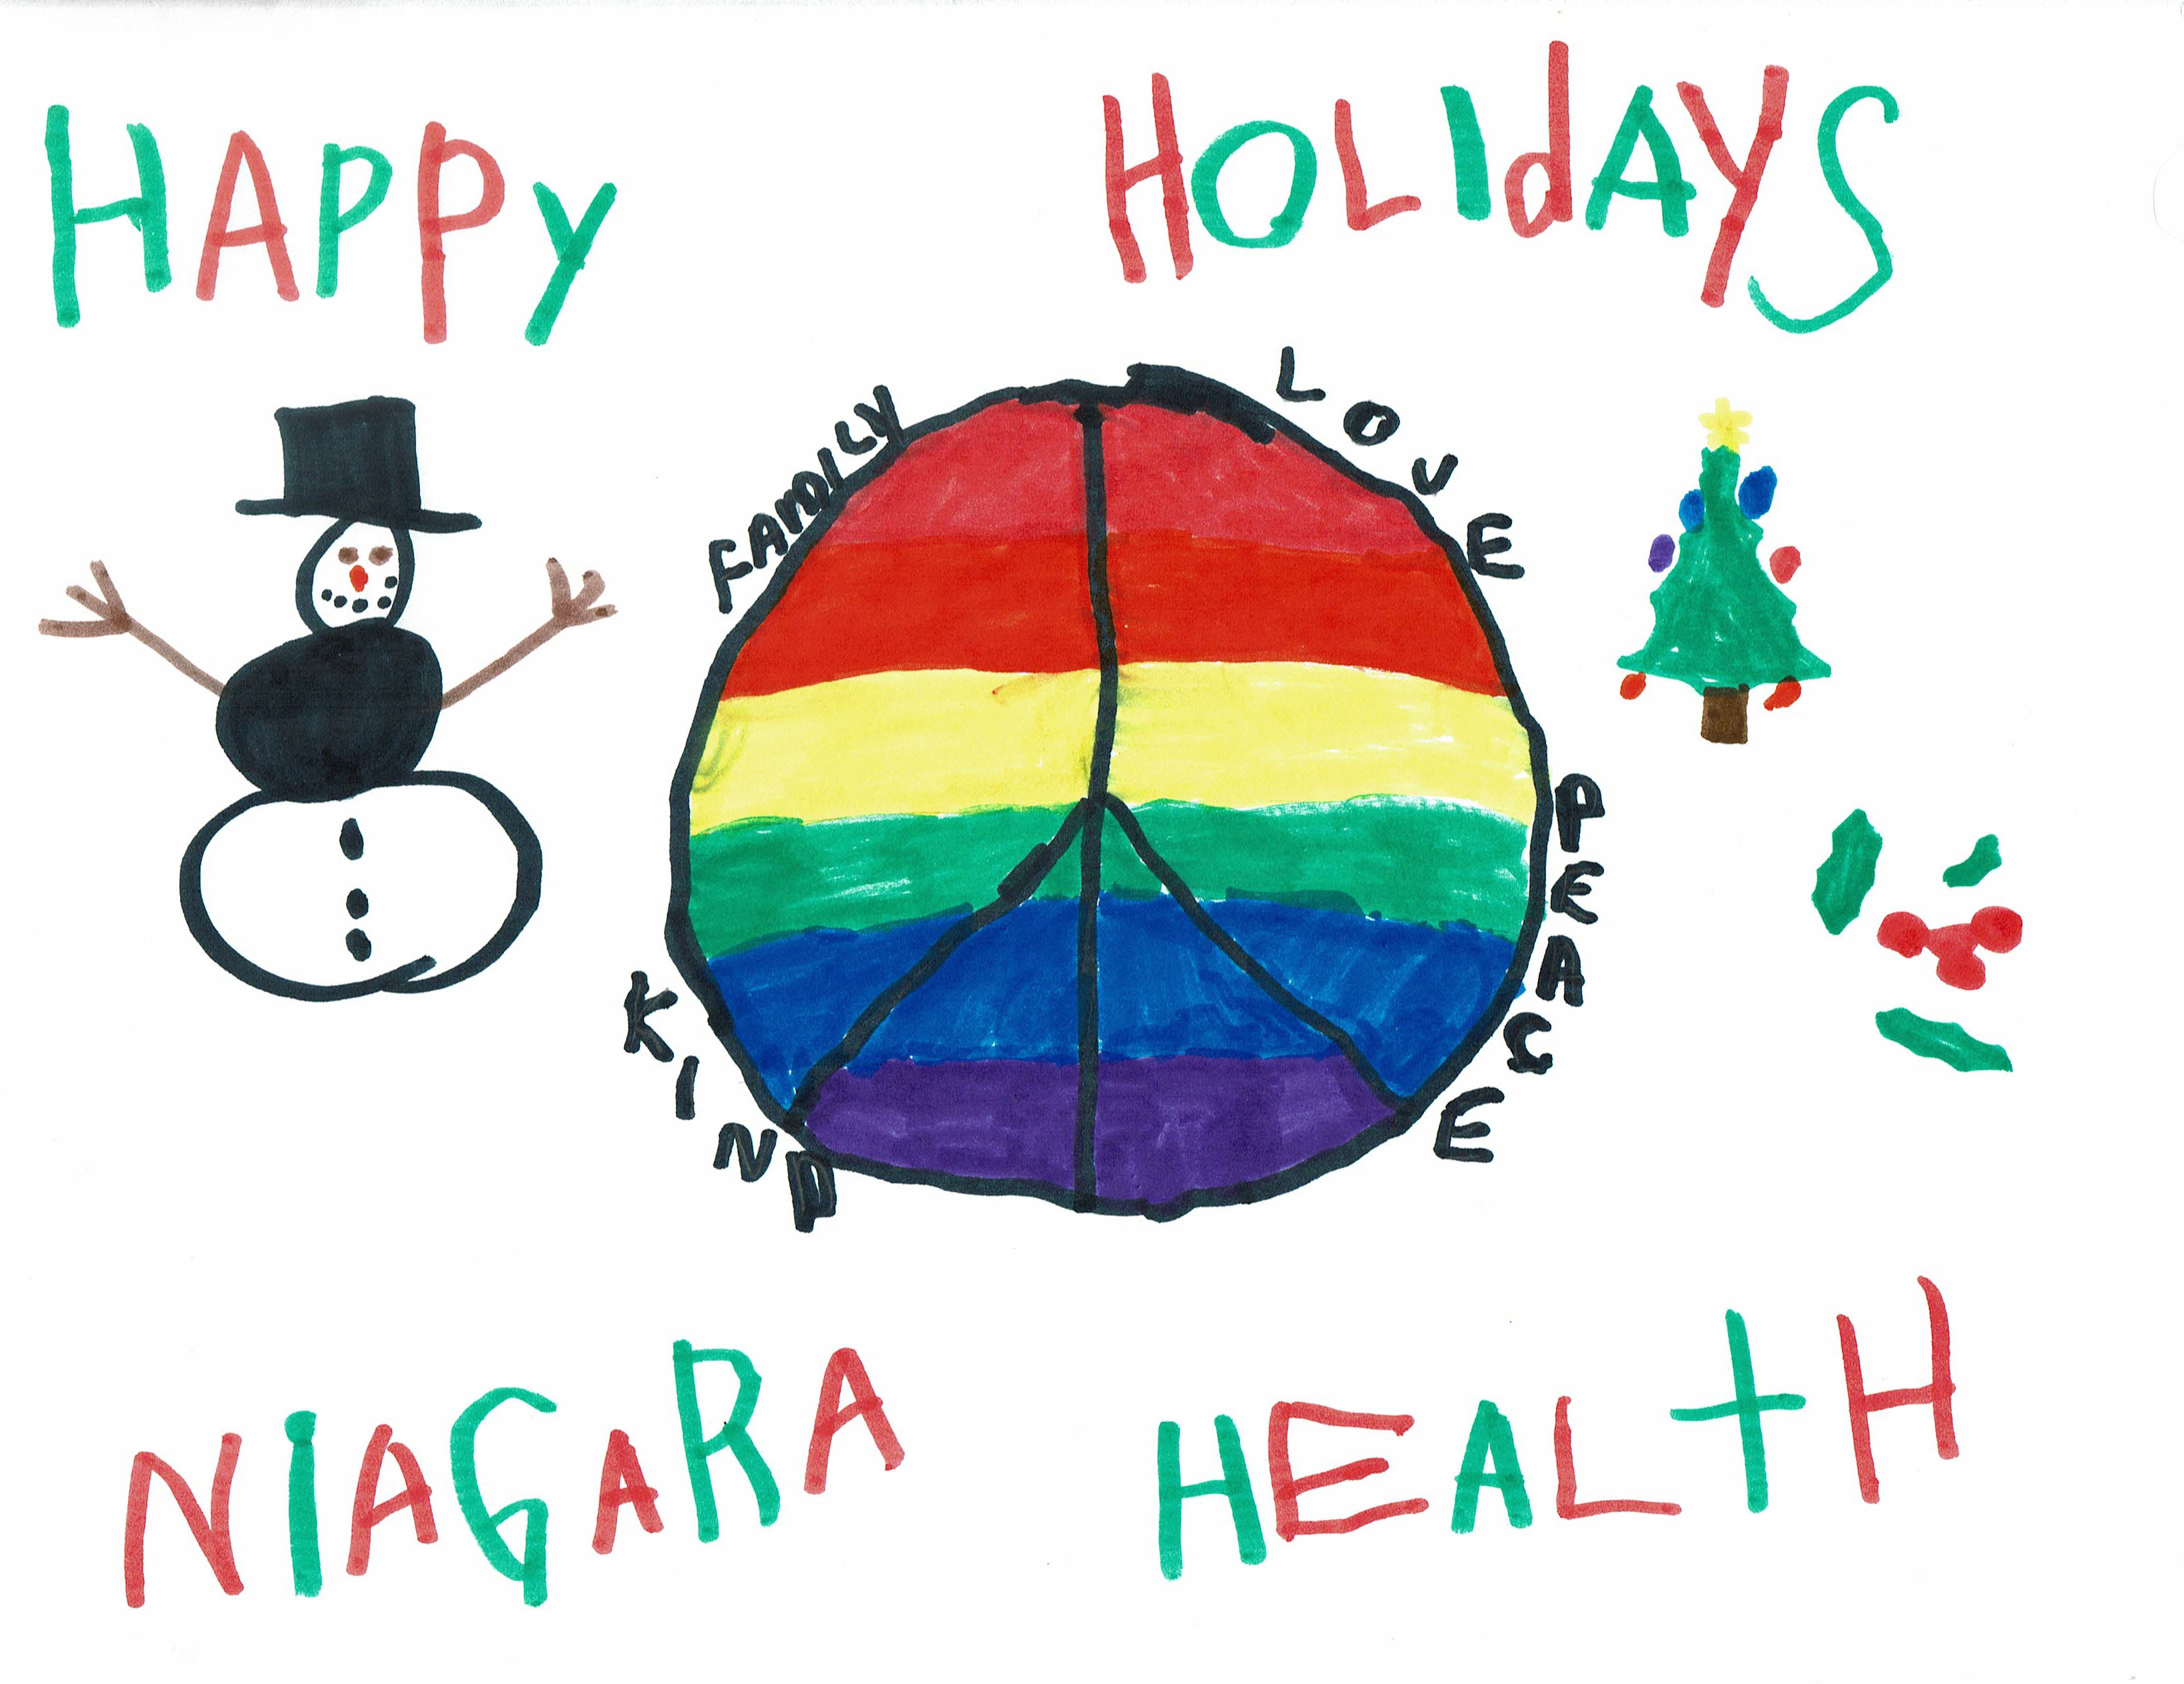 A holiday card featuring a snowman and rainbow peace sign